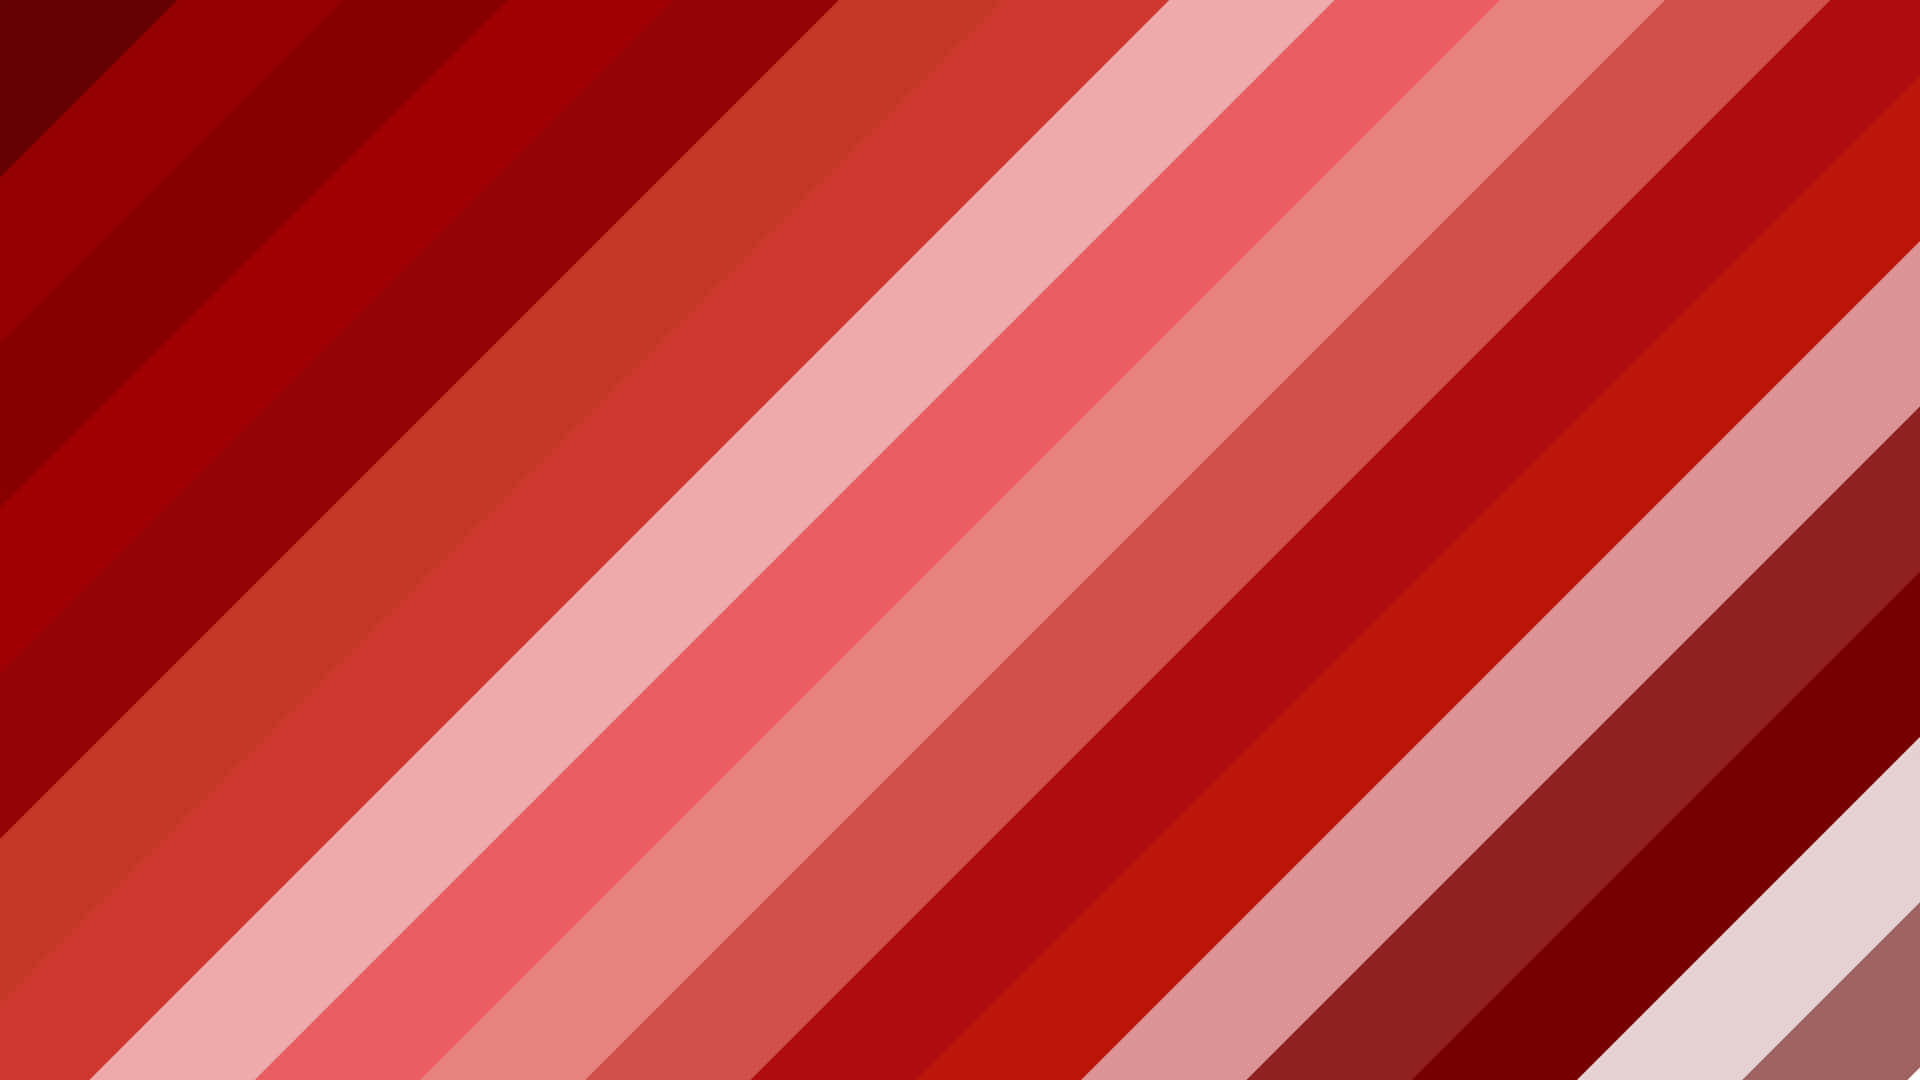 A Red And White Striped Background